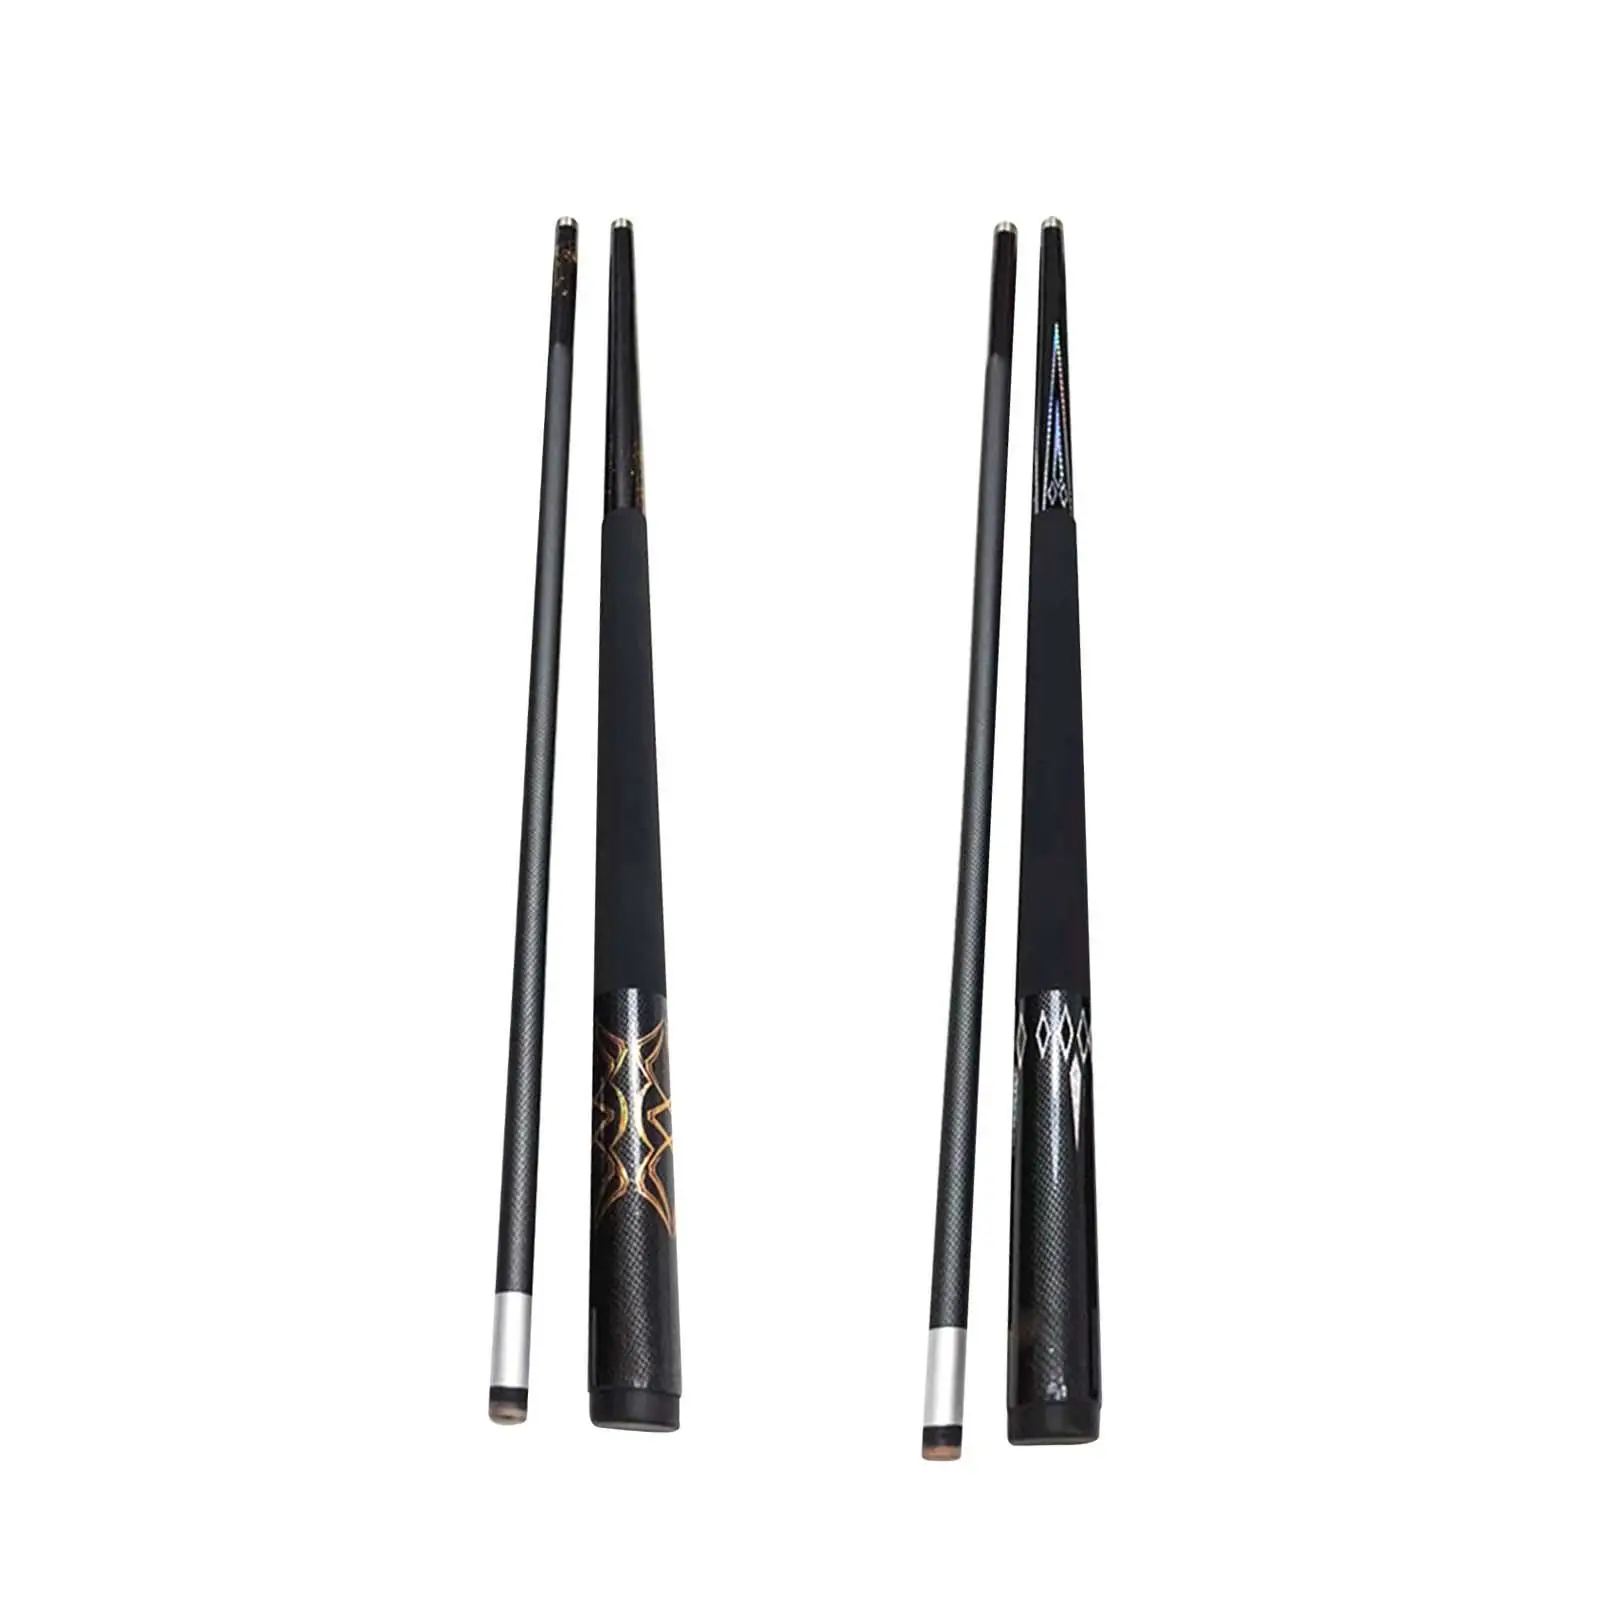 

Snooker Pool Sticks 58 Inch, 1/2 Billiard Pool Cue, Made of Carbon Fiber, No Deformation Or Cracking, Nice Balance and Weight